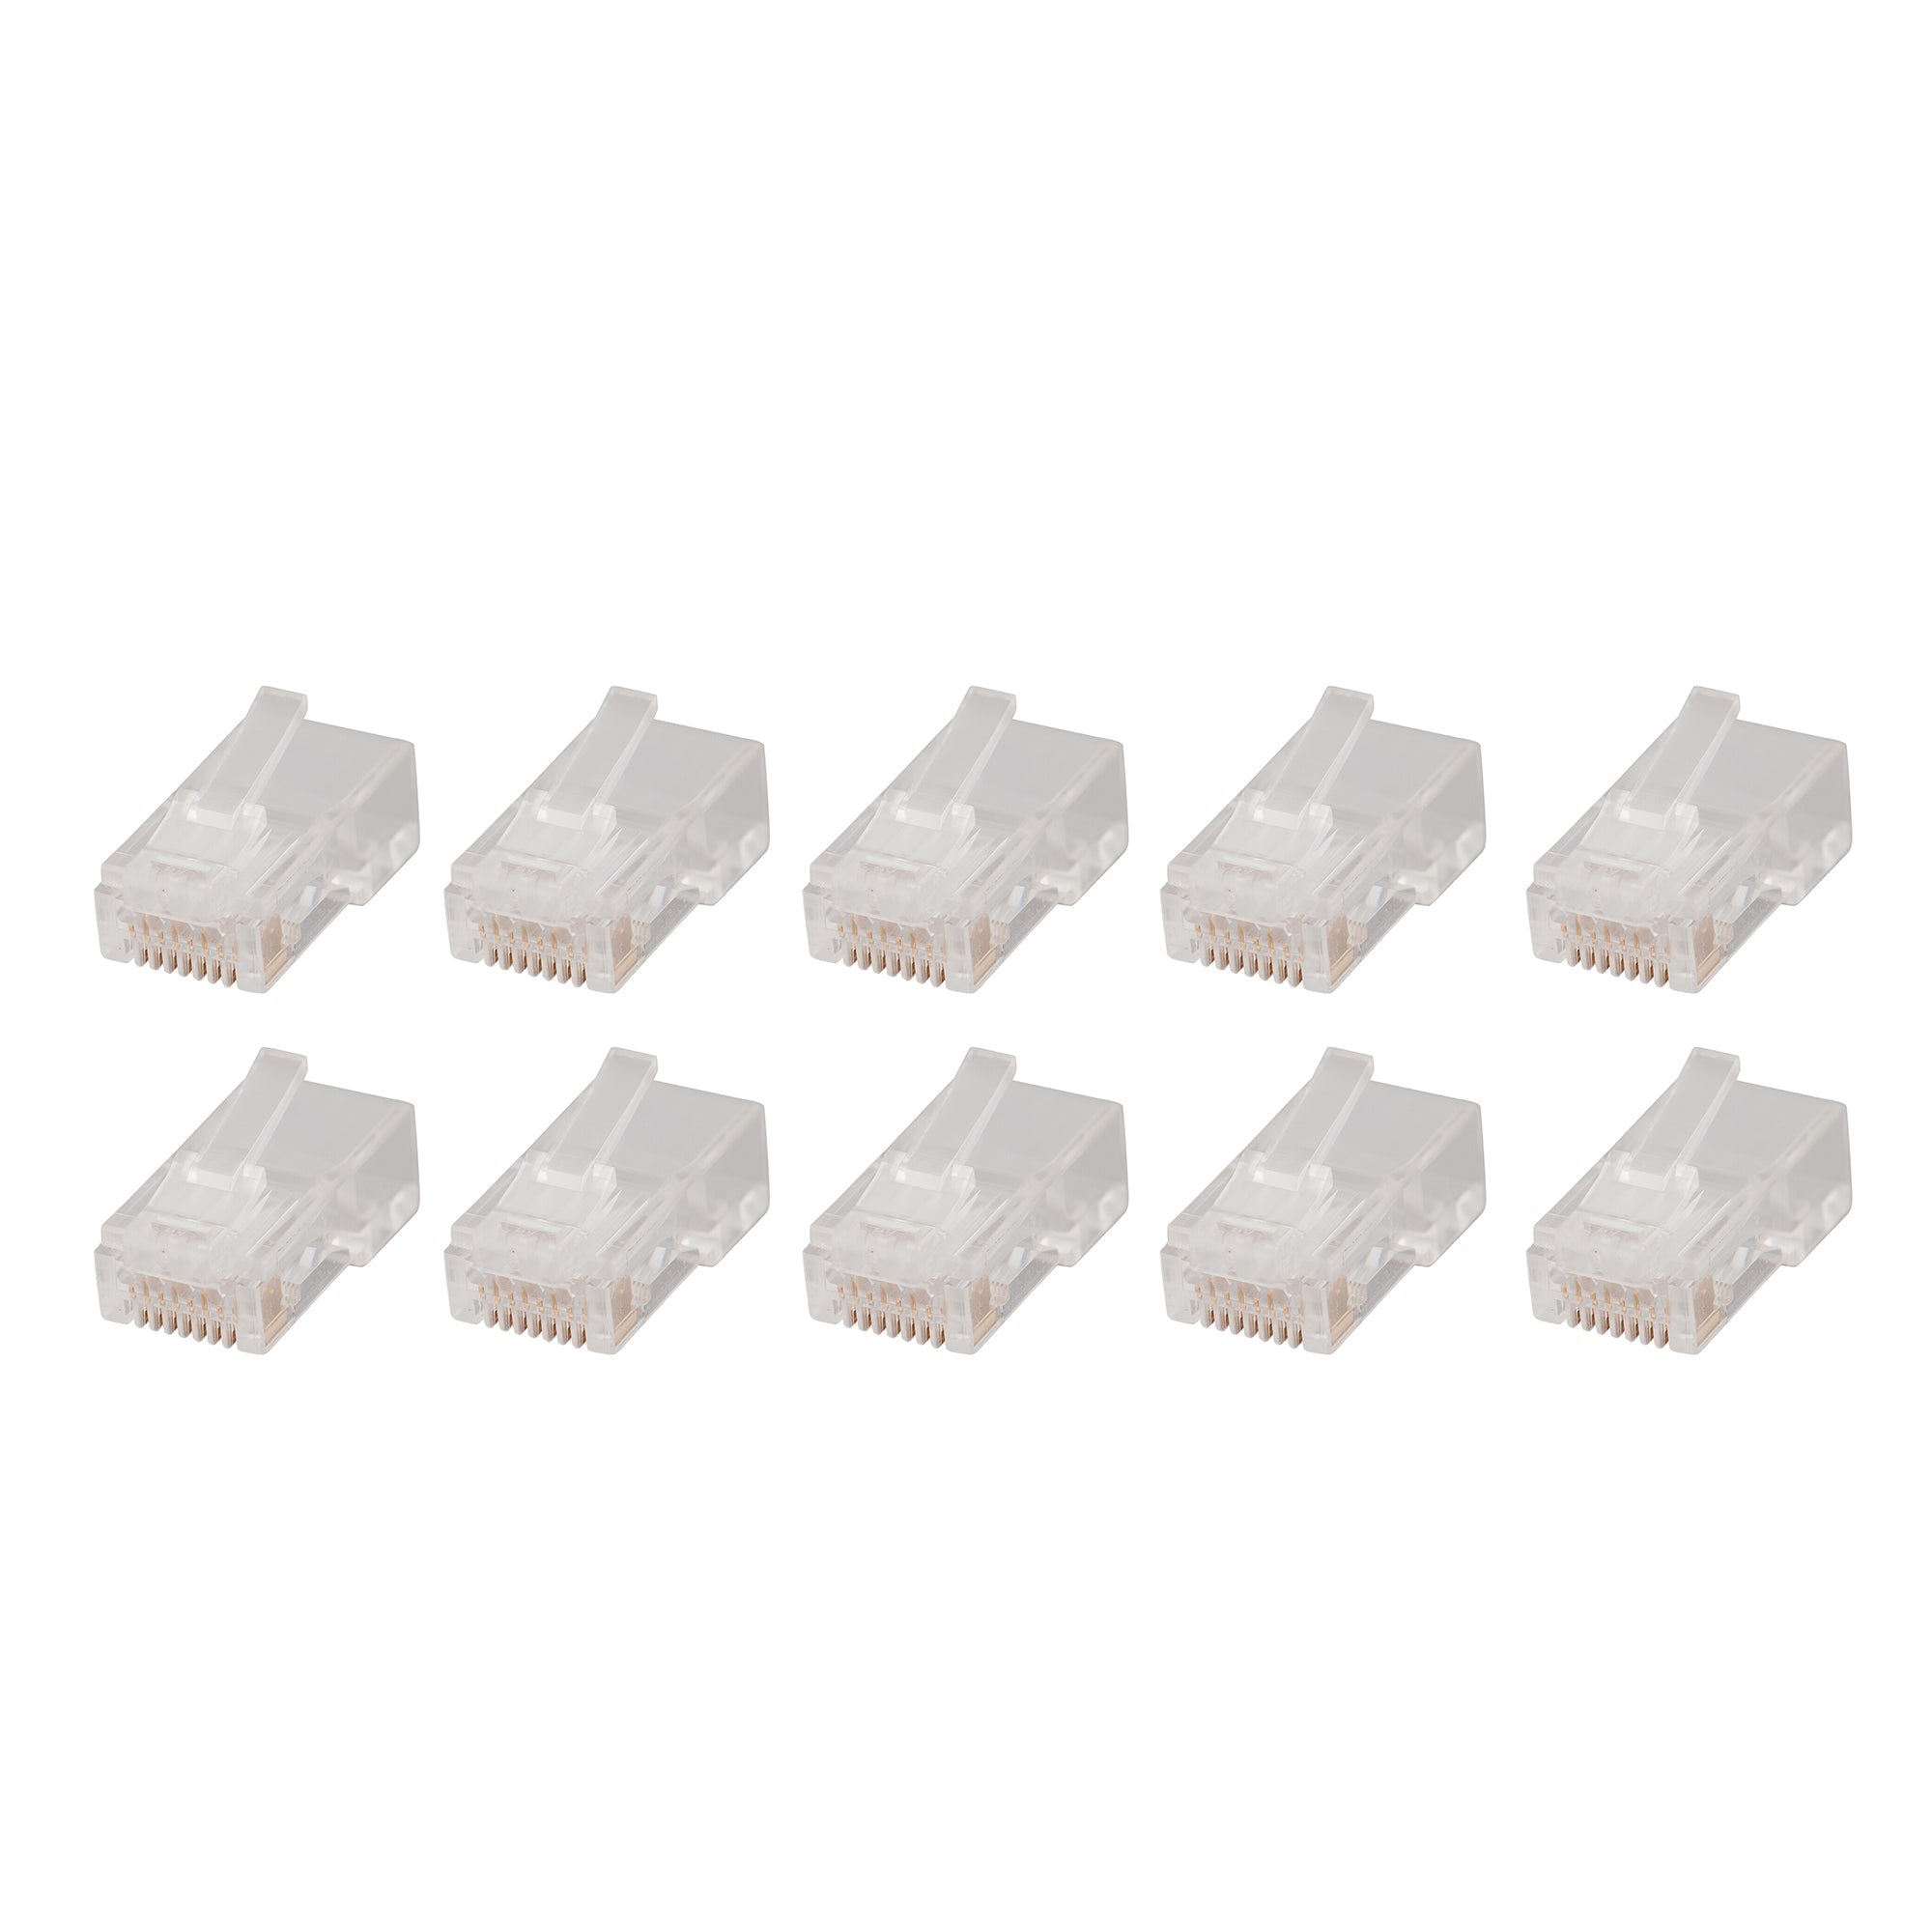 RJ45 Connectors For CAT5 Cable - 10 Pack